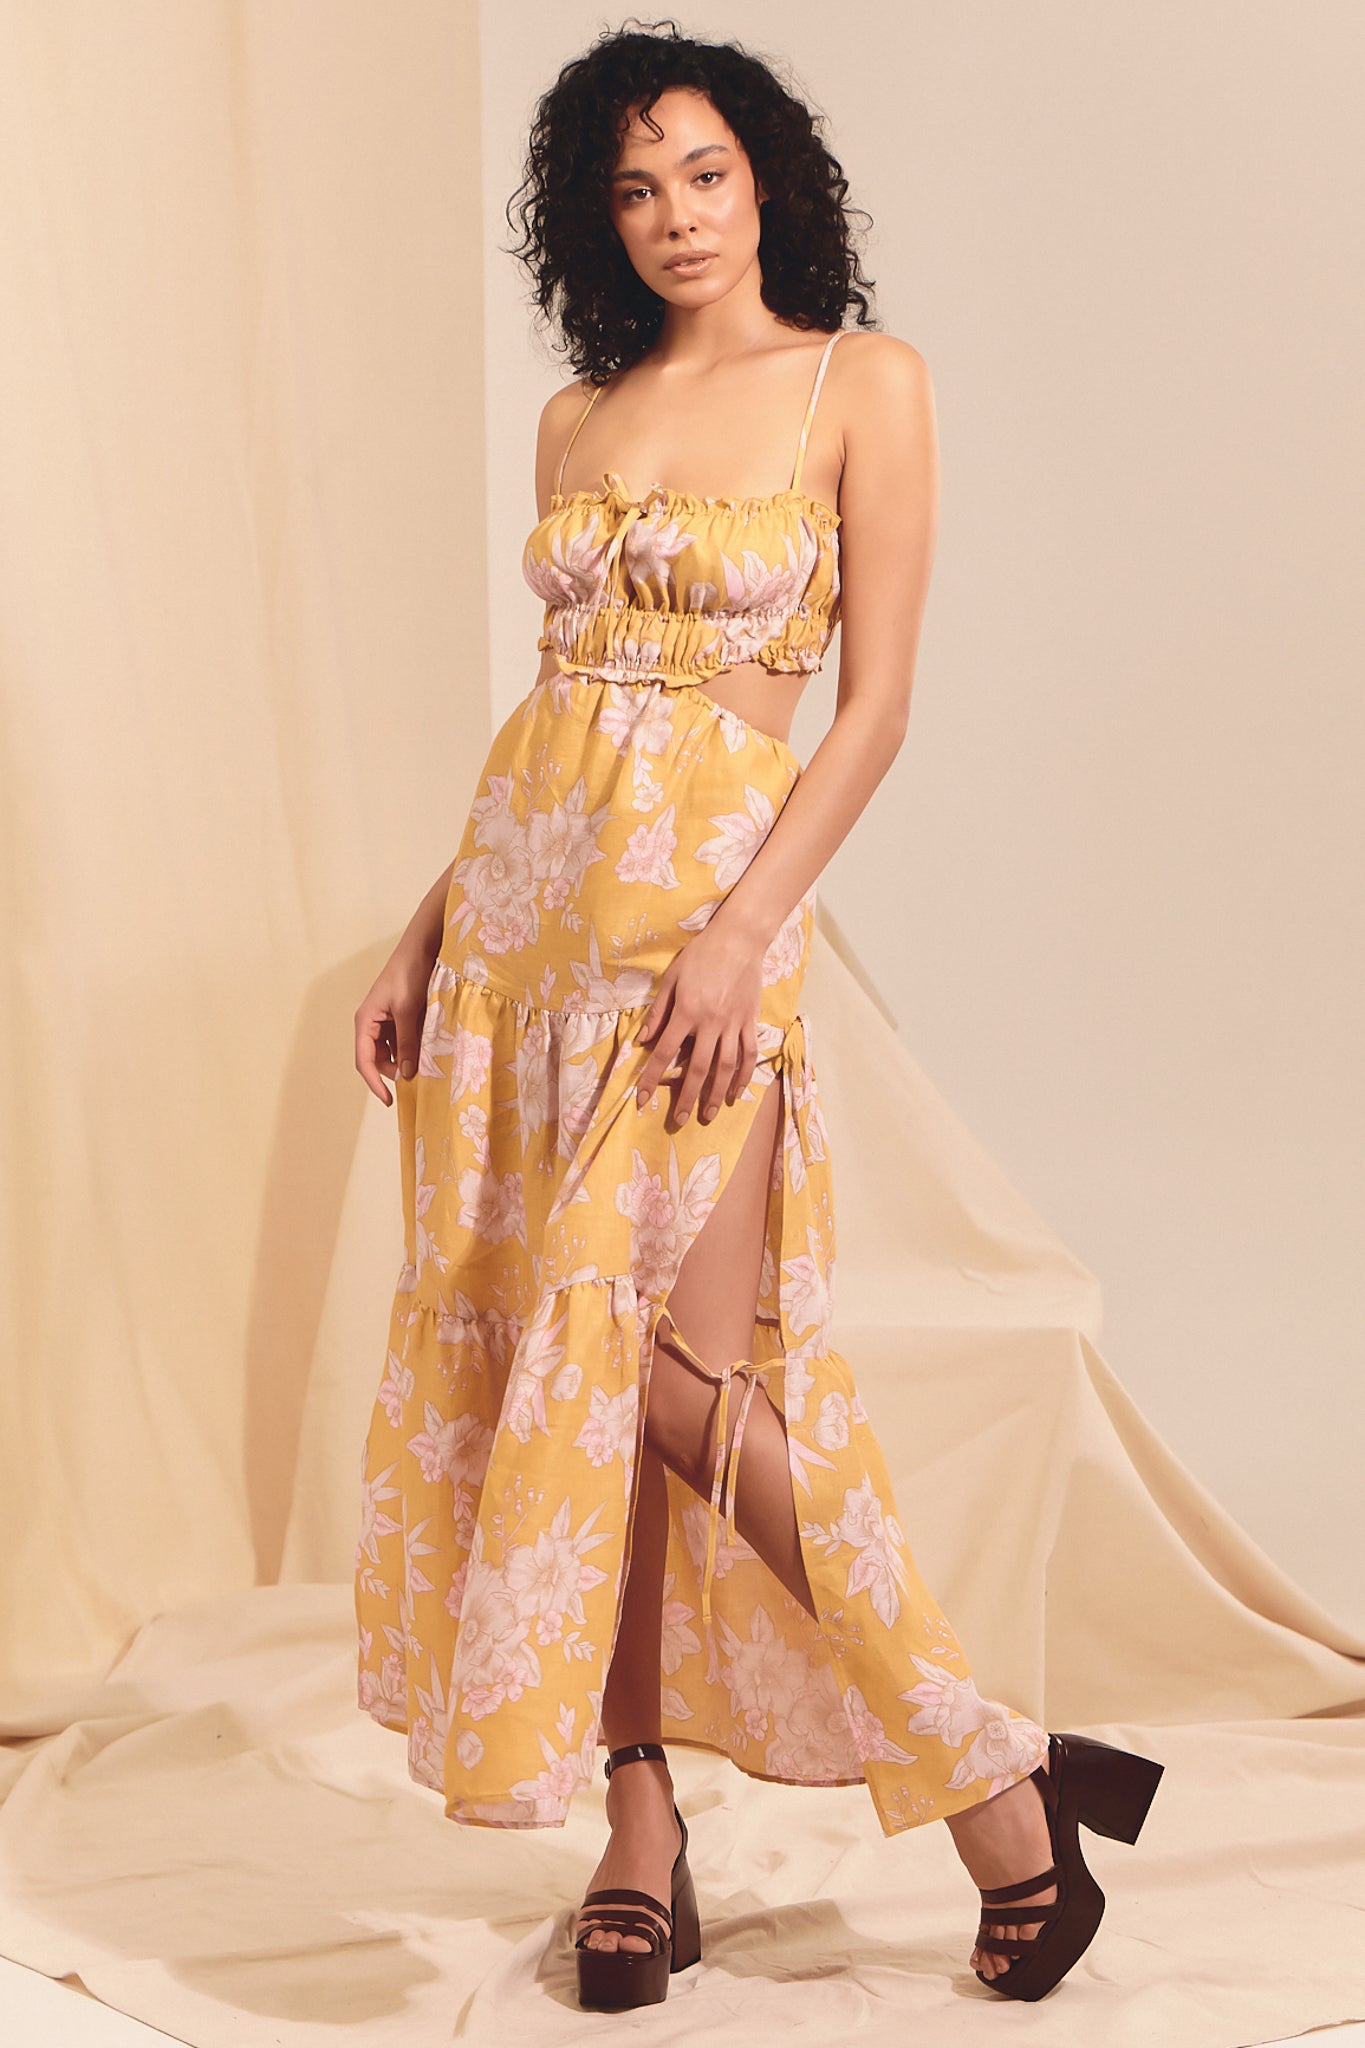 JAASE - Koda Maxi Dress: Cut Out Tiered Dress with Spaghetti Straps in Hawaii Sunrise